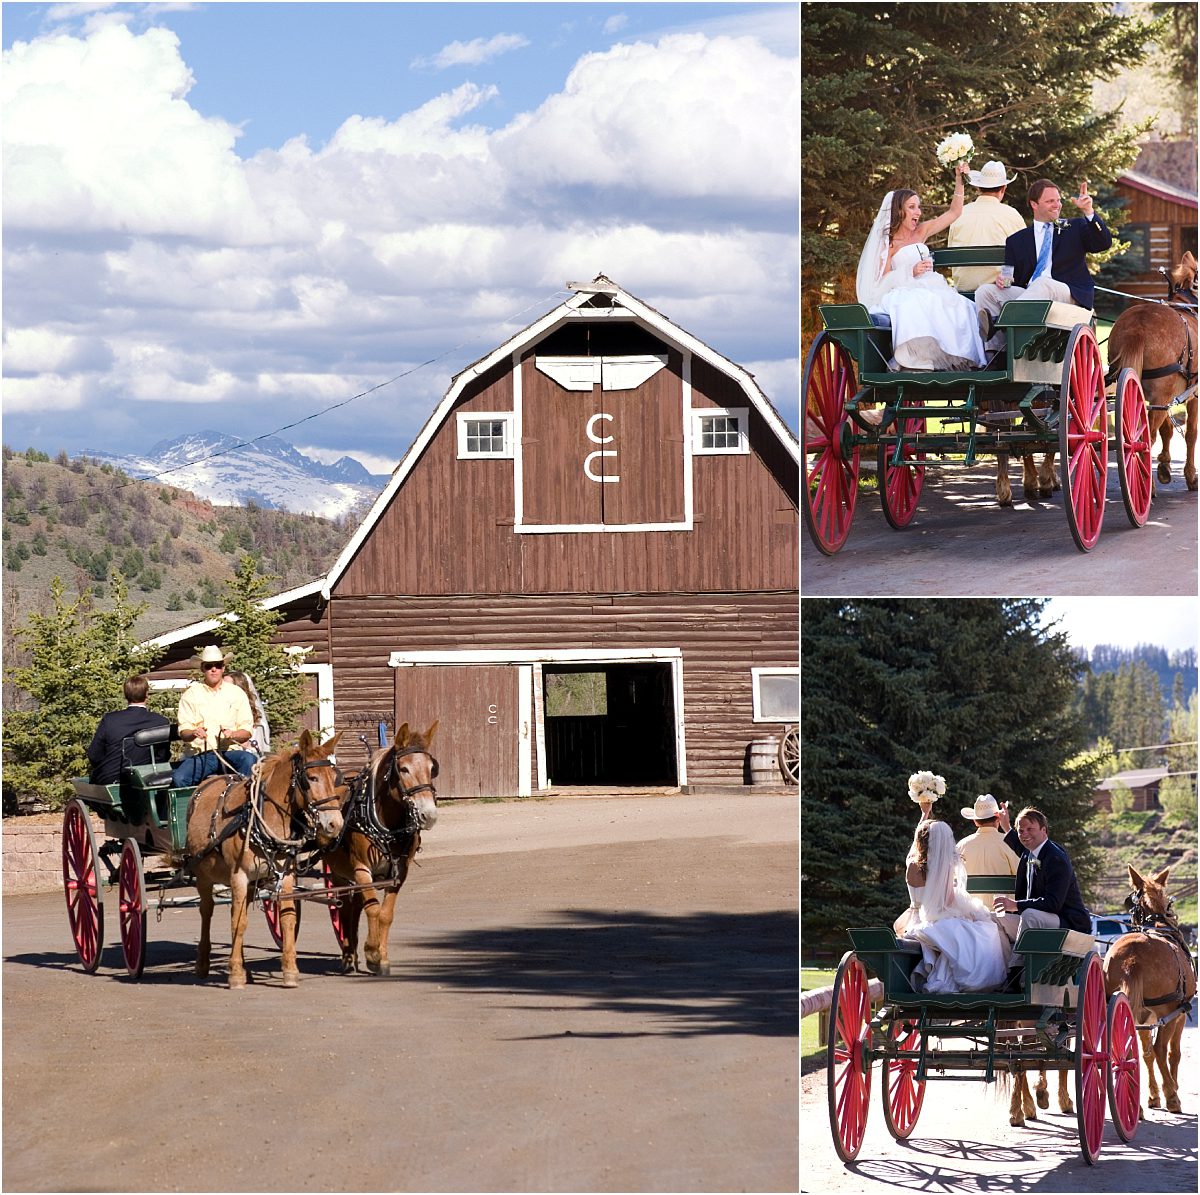 horse and carriage, bride and groom riding on carriage to reception,C Lazy U Ranch, Granby, Colorado Wedding Photography, Mountain Wedding Photographer, old western theme